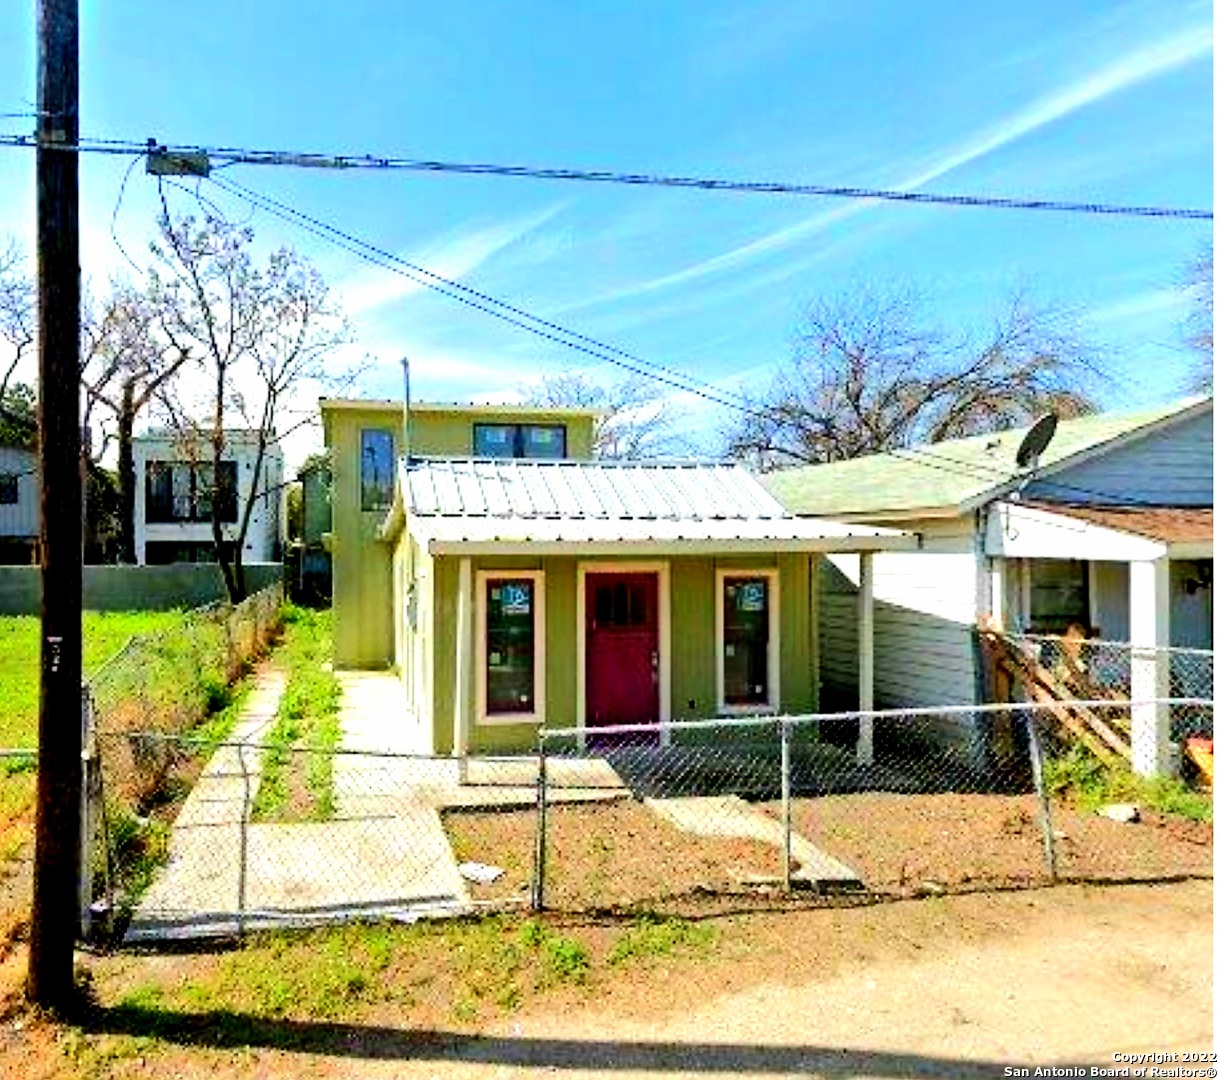 If your looking for prime property, look no further.  The property is located walking distance to downtown San Antonio and all that the city has to offer. This property is in mid finish. Some finish items include: Tin Roof 2015, washer and dryer hookup, windows, fully tape and float, The property has strong bones and waiting to be finished as desired. Currently the property is a One bedroom one bath and Zoned RM-4. This property  would make a great airbnb, investment property or a "get away" home  made to suite. Located minutes from the Airport, Alamodome, Riverwalk, Shops, Restaurants, The Pearl Brewery, Parks and so much more! This property can also be sold with the property behind at 321 Lavaca MLS 1587958